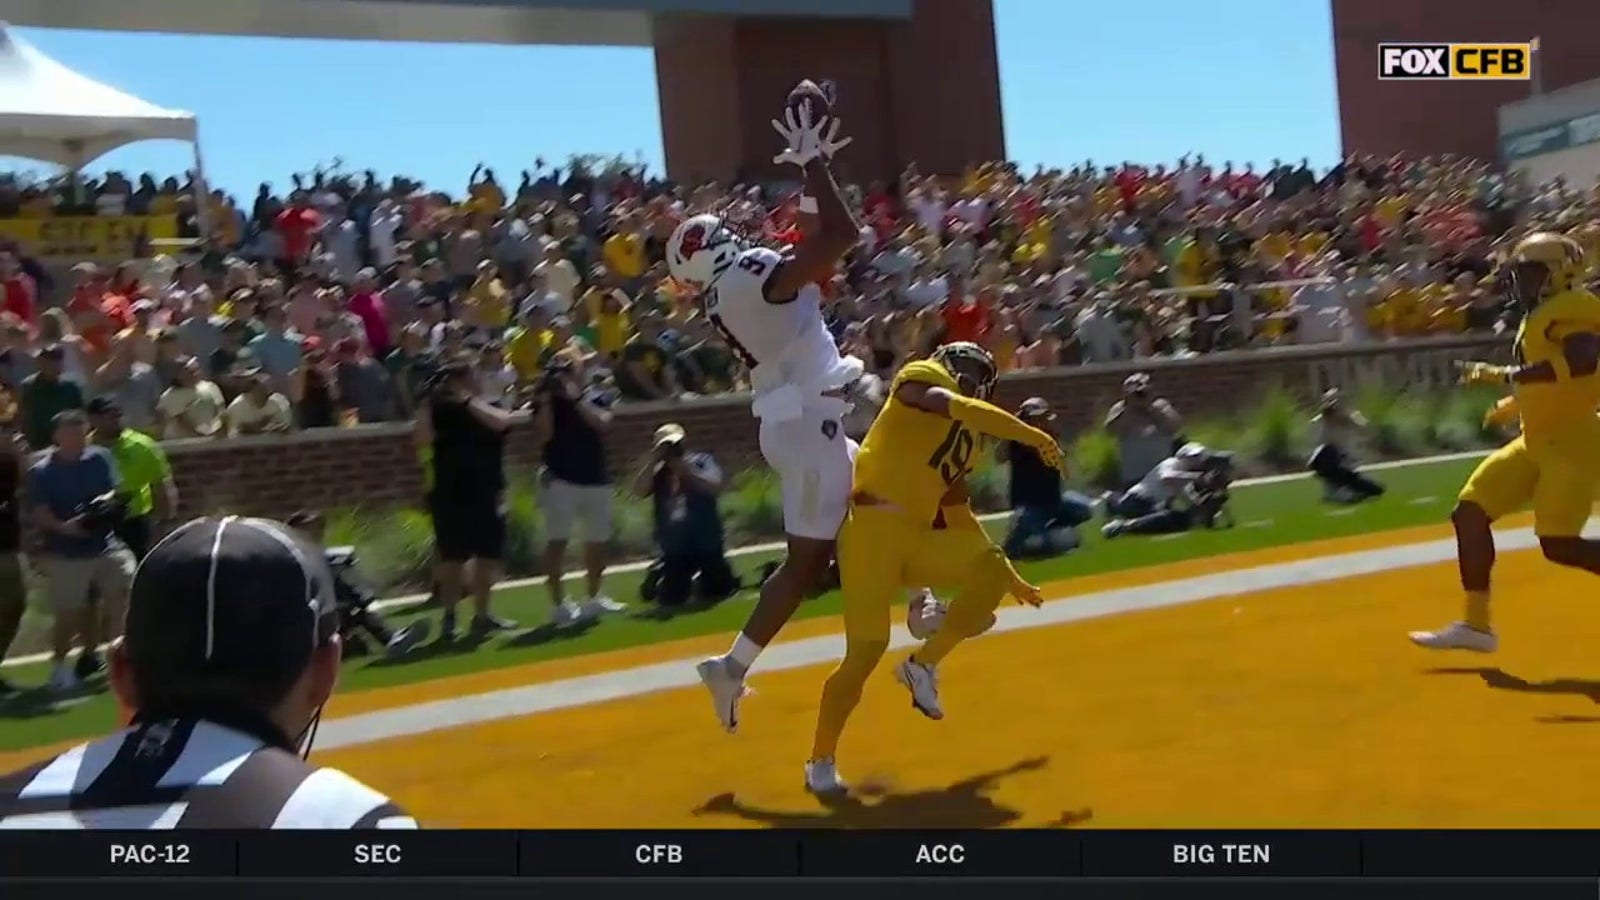 Bryson Green does a ridiculous grab in the end zone